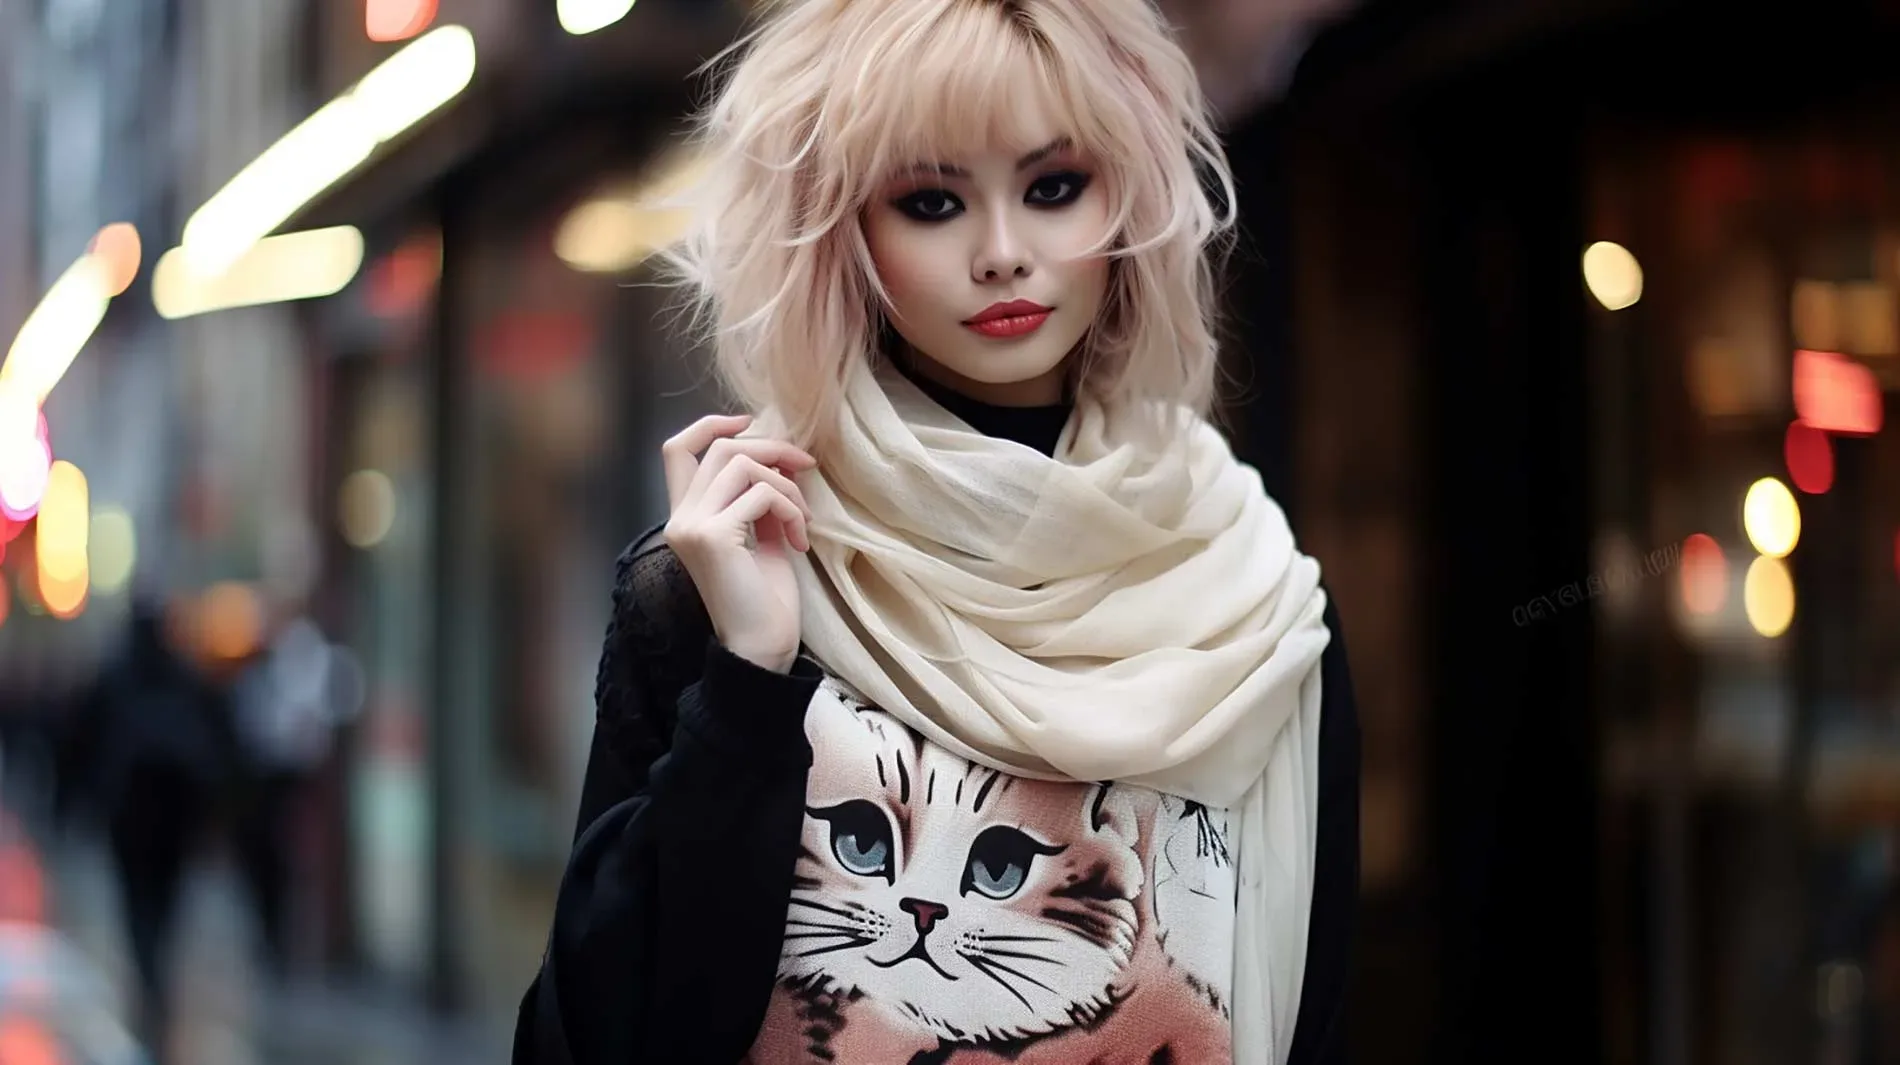 Elegant young woman wearing a sweater with a cartoon cat on it